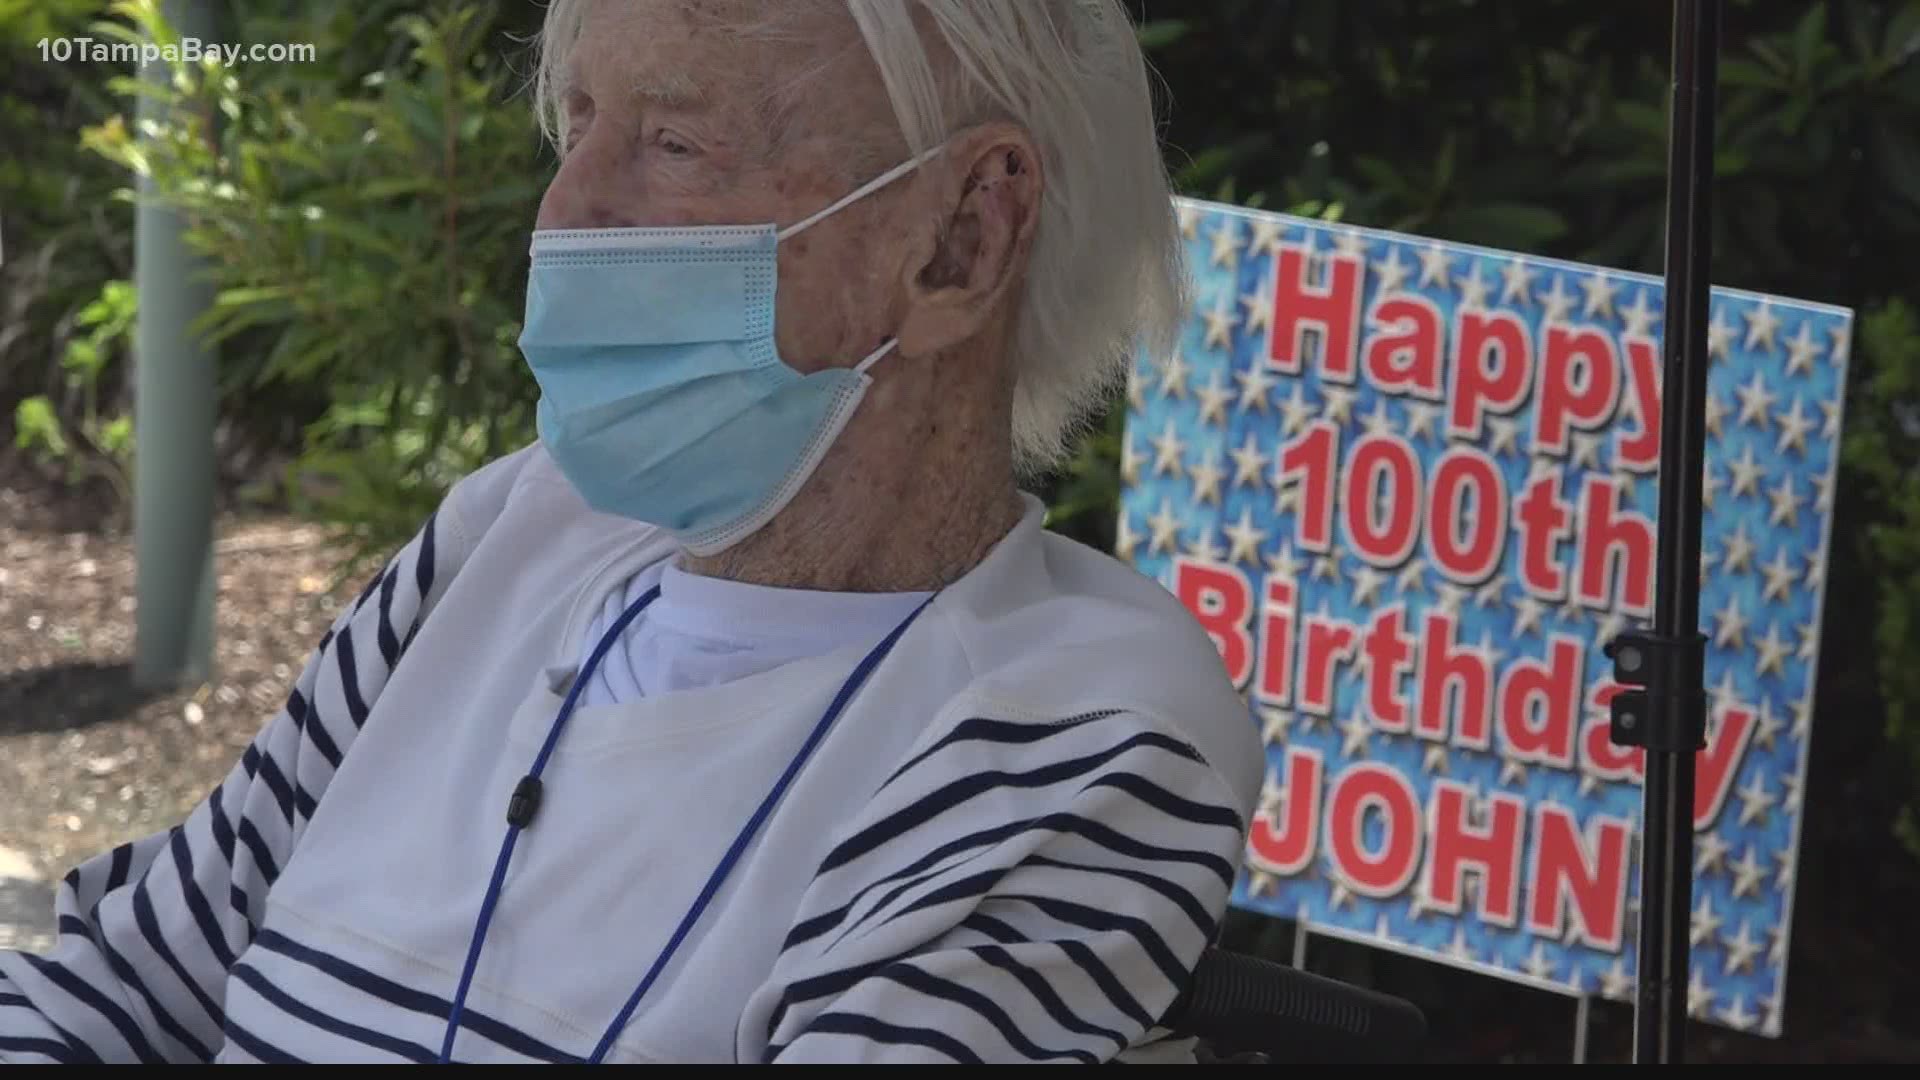 John Rinker served in the Philippines during WWII and turned 100 years old on Thursday.